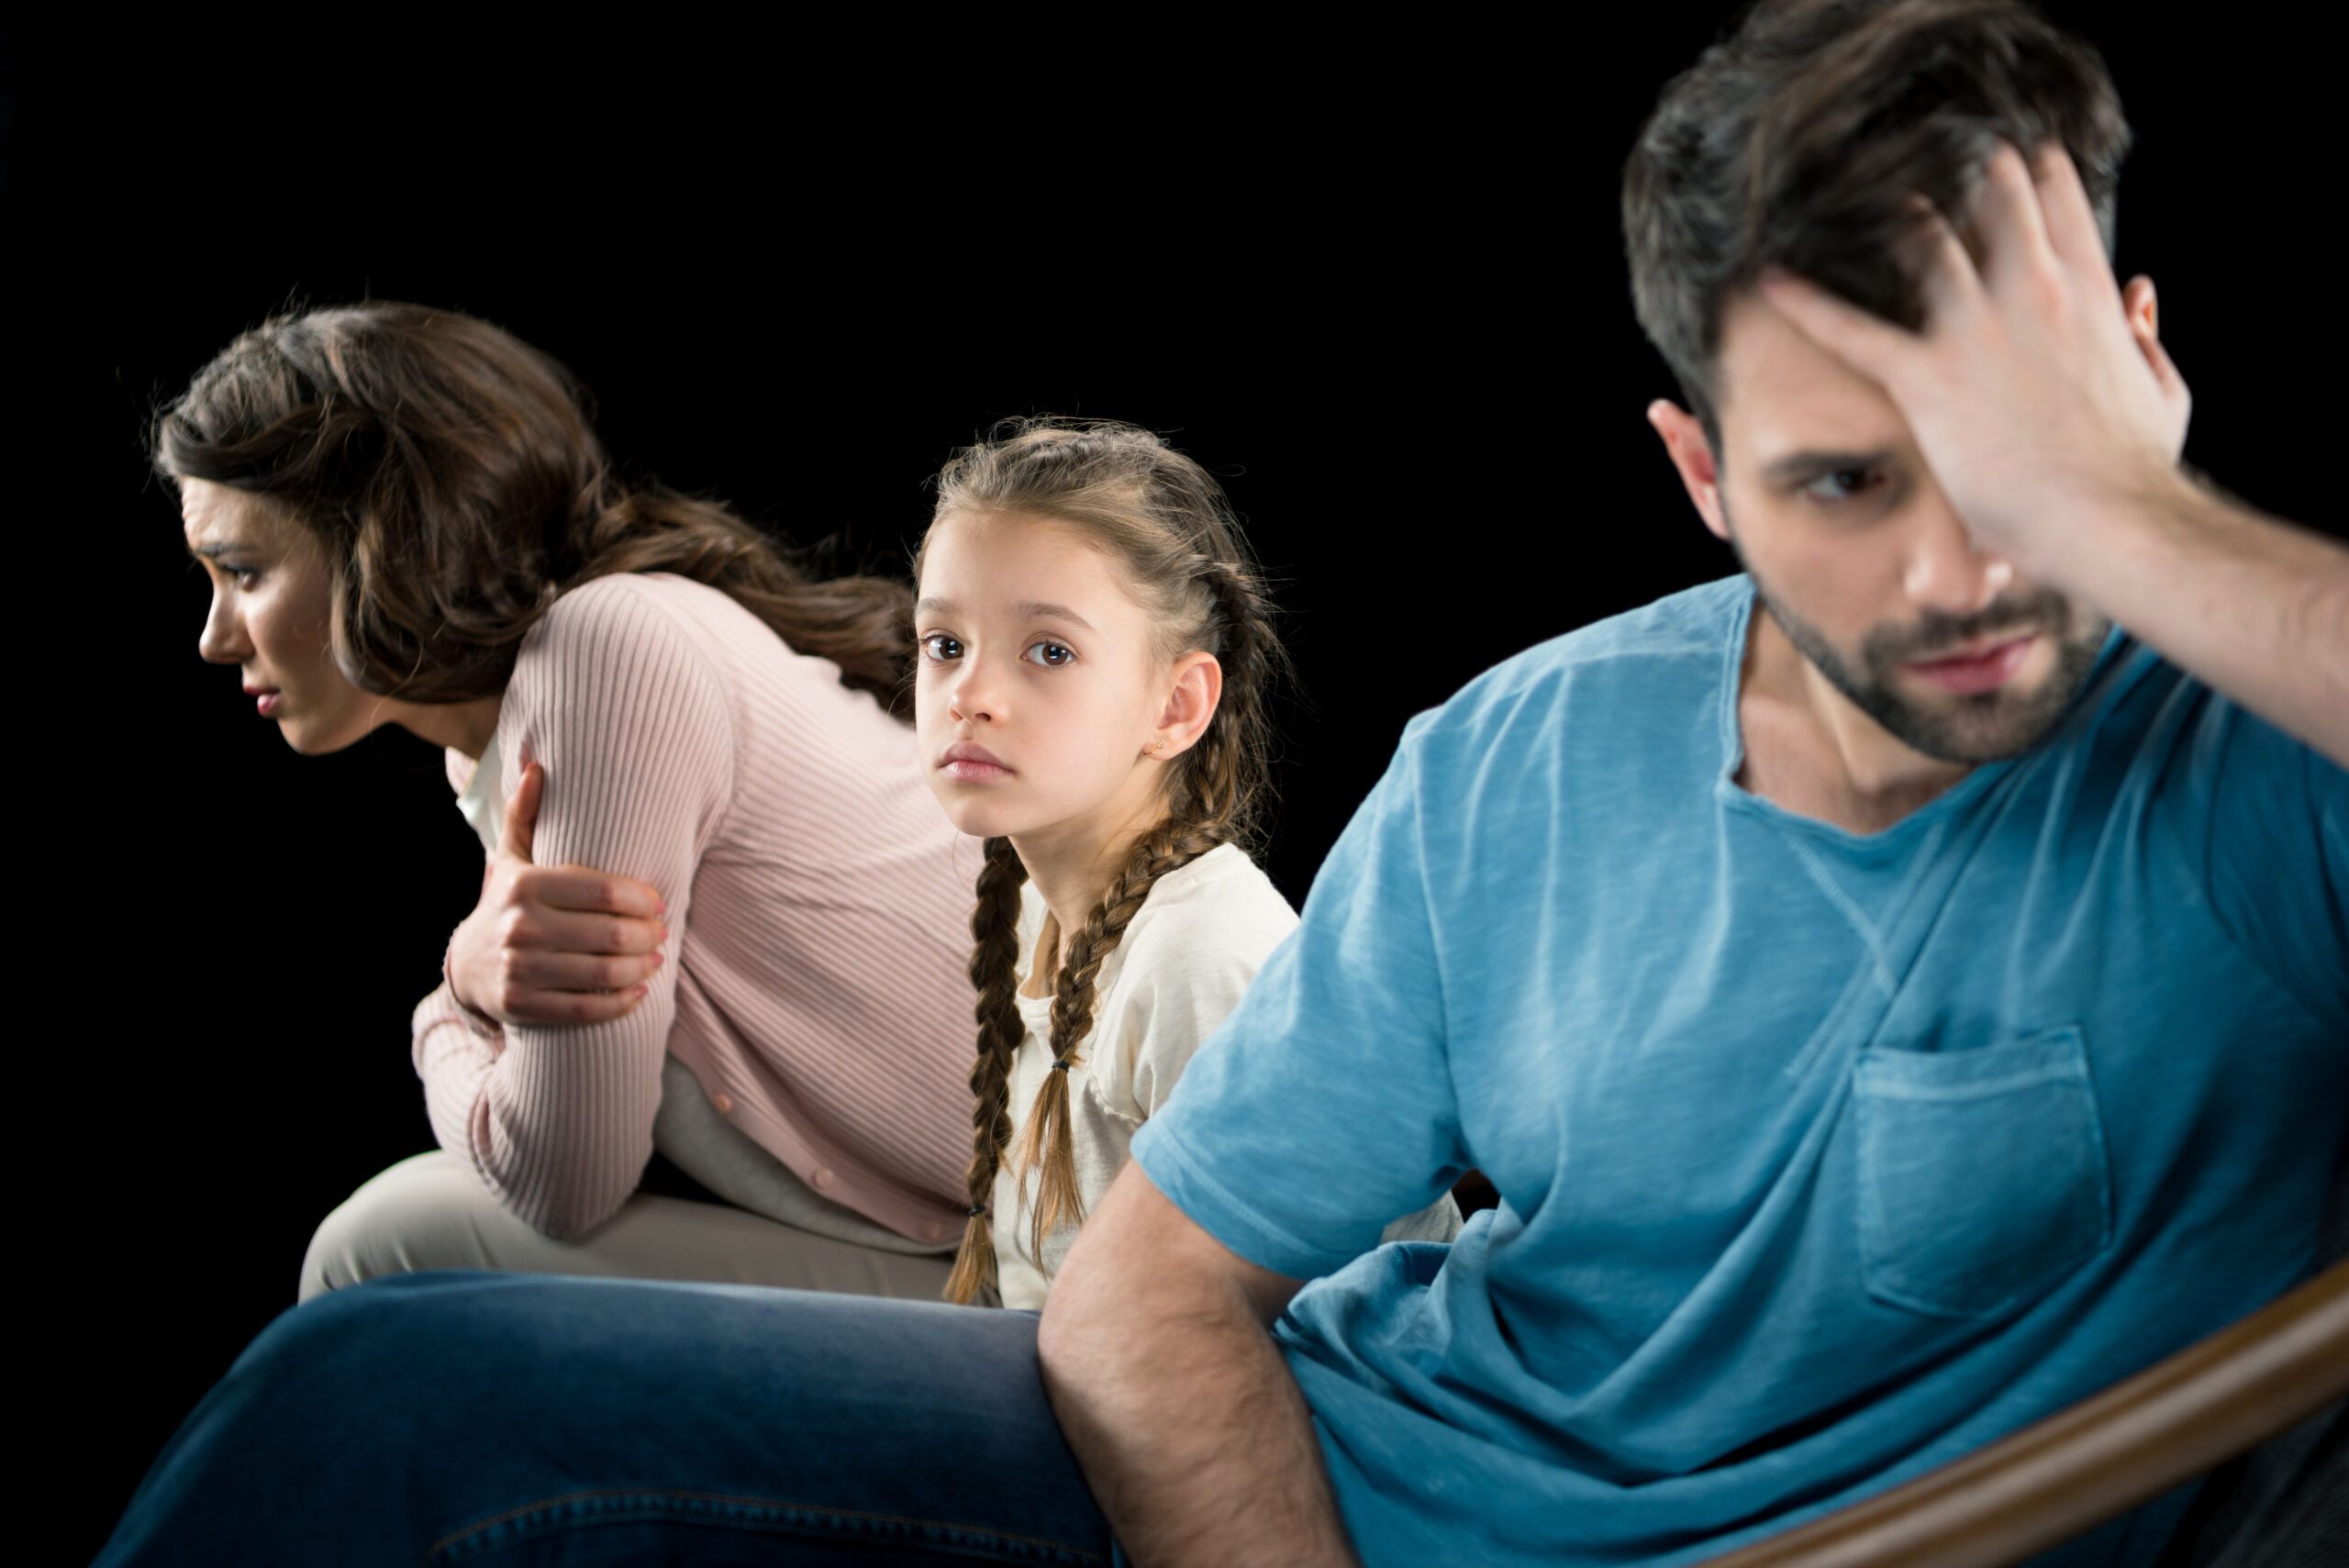 Unhappy child sitting between parents who are turned away from each other | Philadelphia child custody lawyers at Vetrano | Vetrano & Feinman